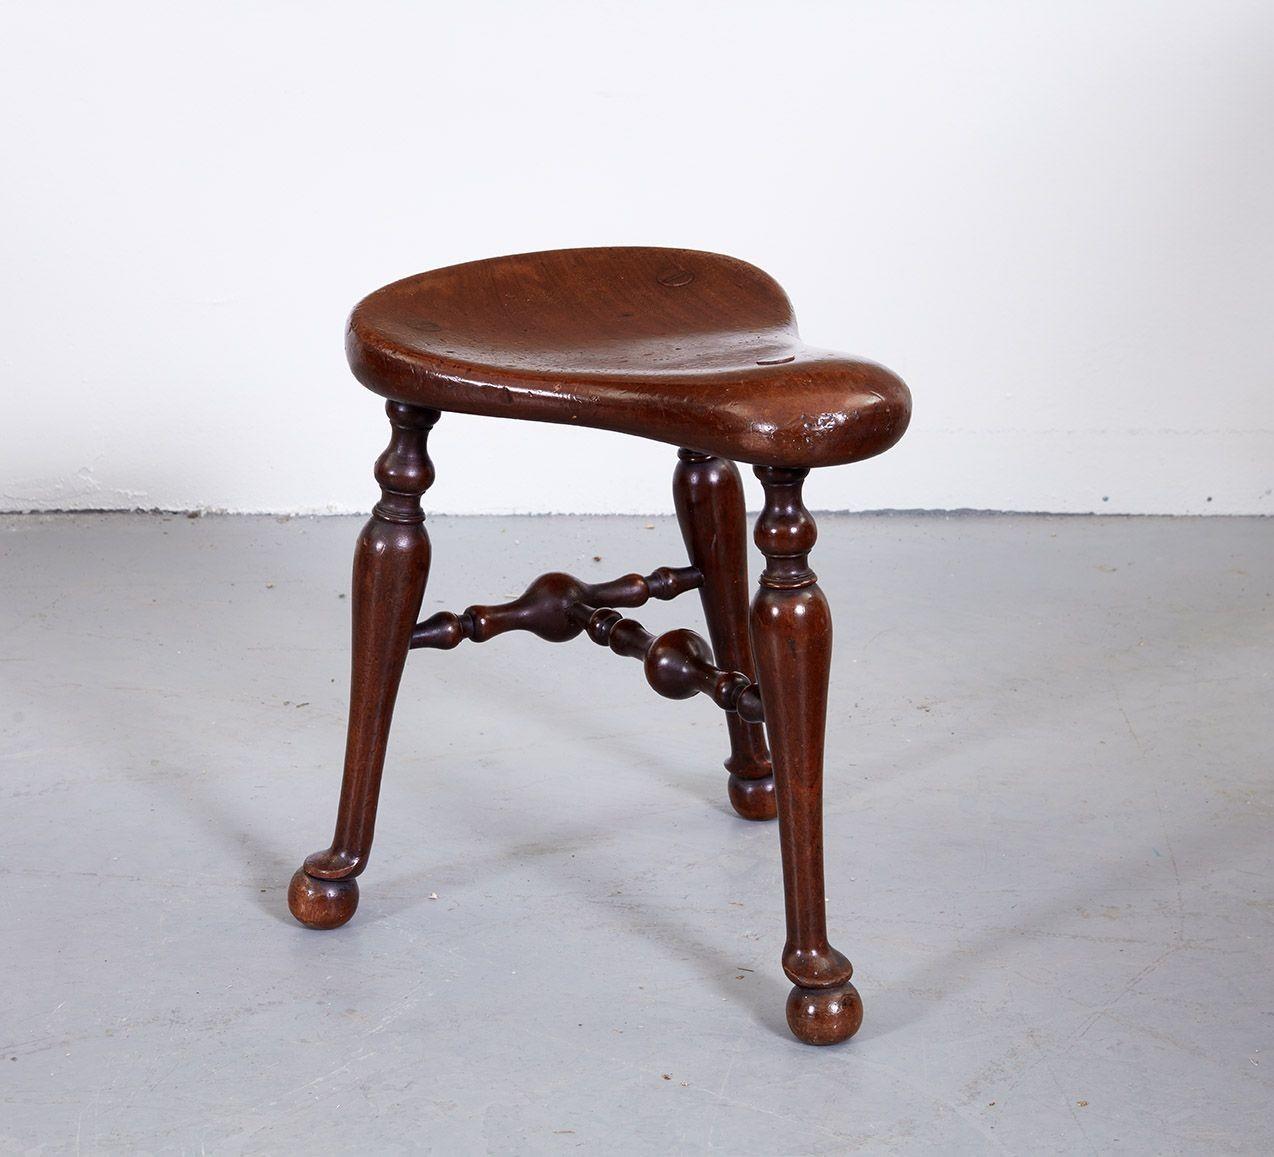 Good late 19th century mahogany saddle stool by James Shoolbred and Co. having shaped seat over turned legs ending in pad feet and joined by bulbous turned T-stretcher, the whole with good rich color and patination, the underside stamped with